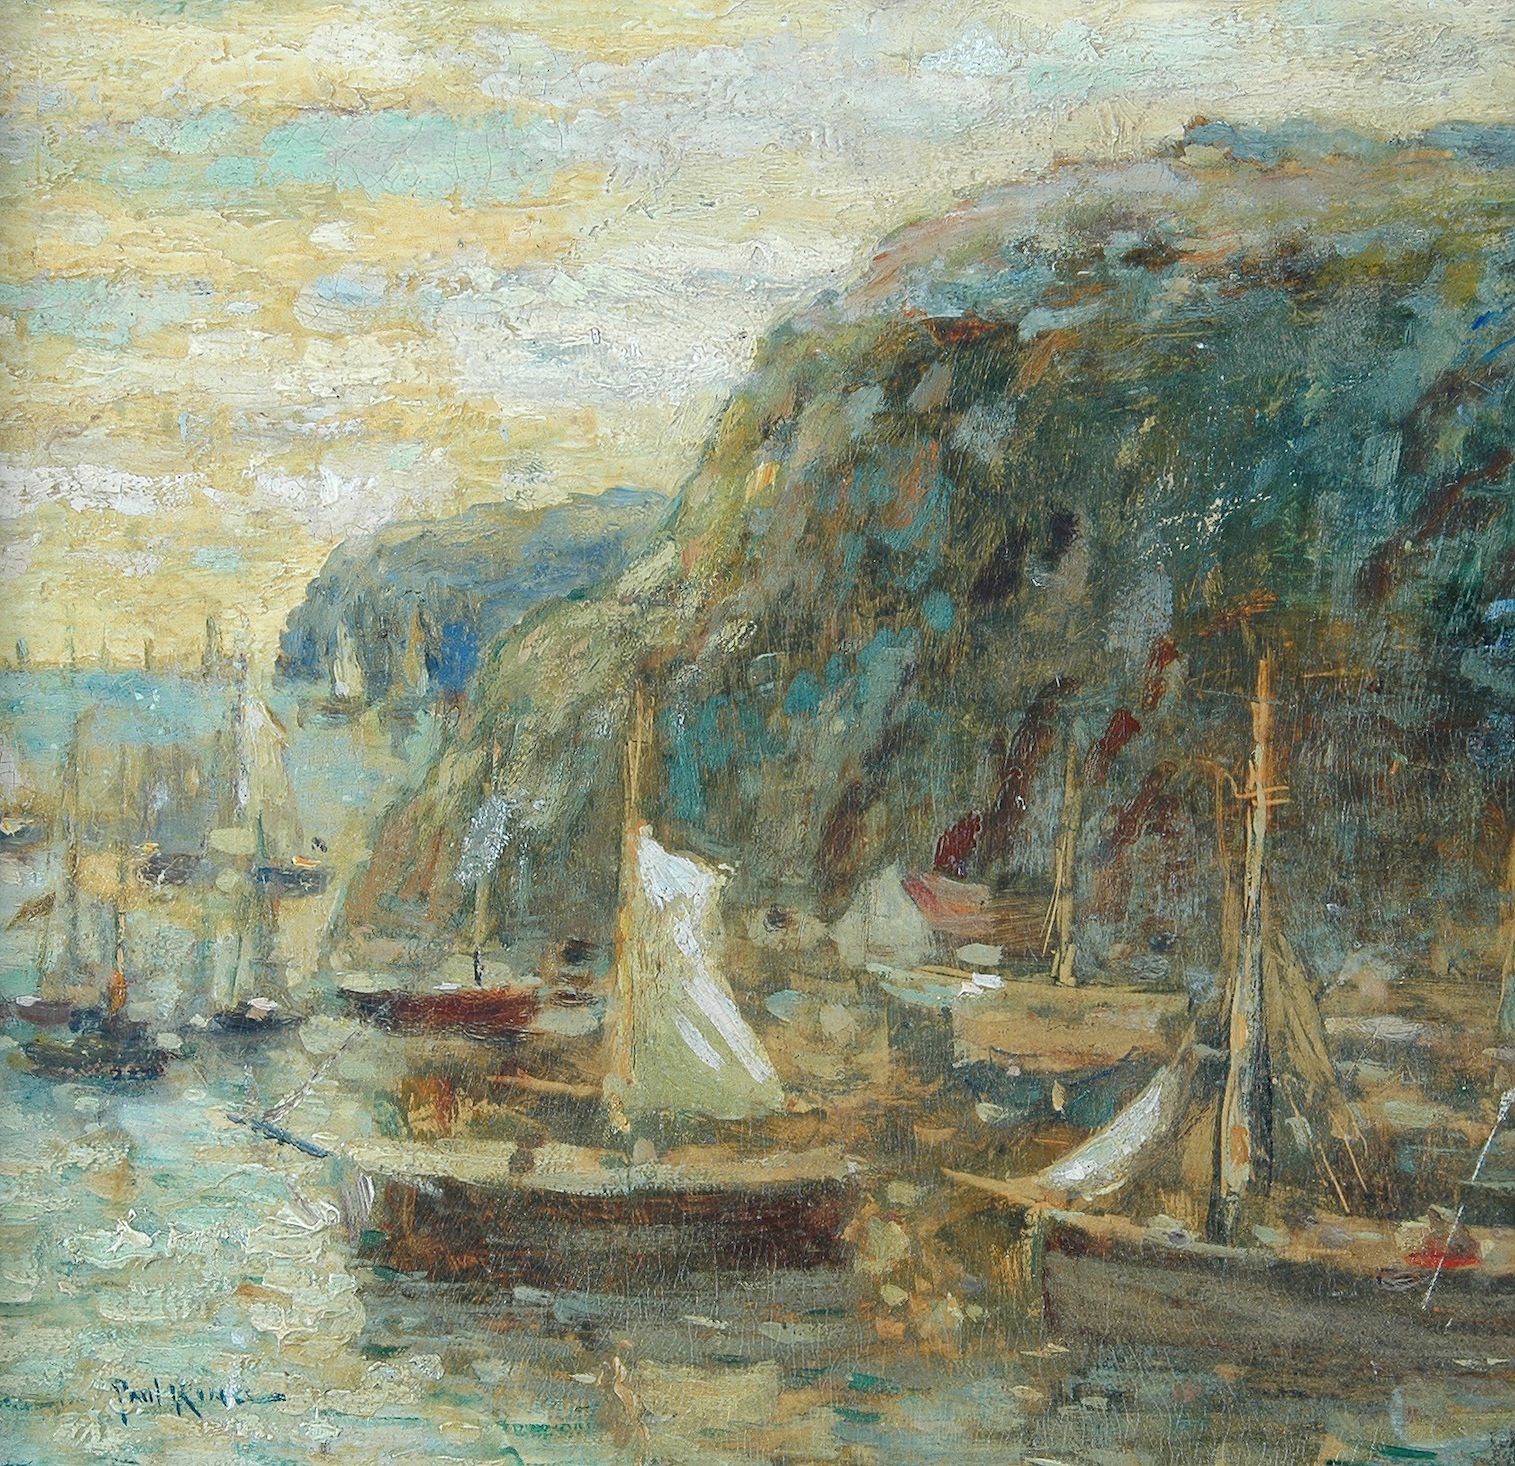 PAUL KING (American 1867-1947) A PAINTING, "Harbor, Nova Scotia", oil on canvas board, signed L/L. 9